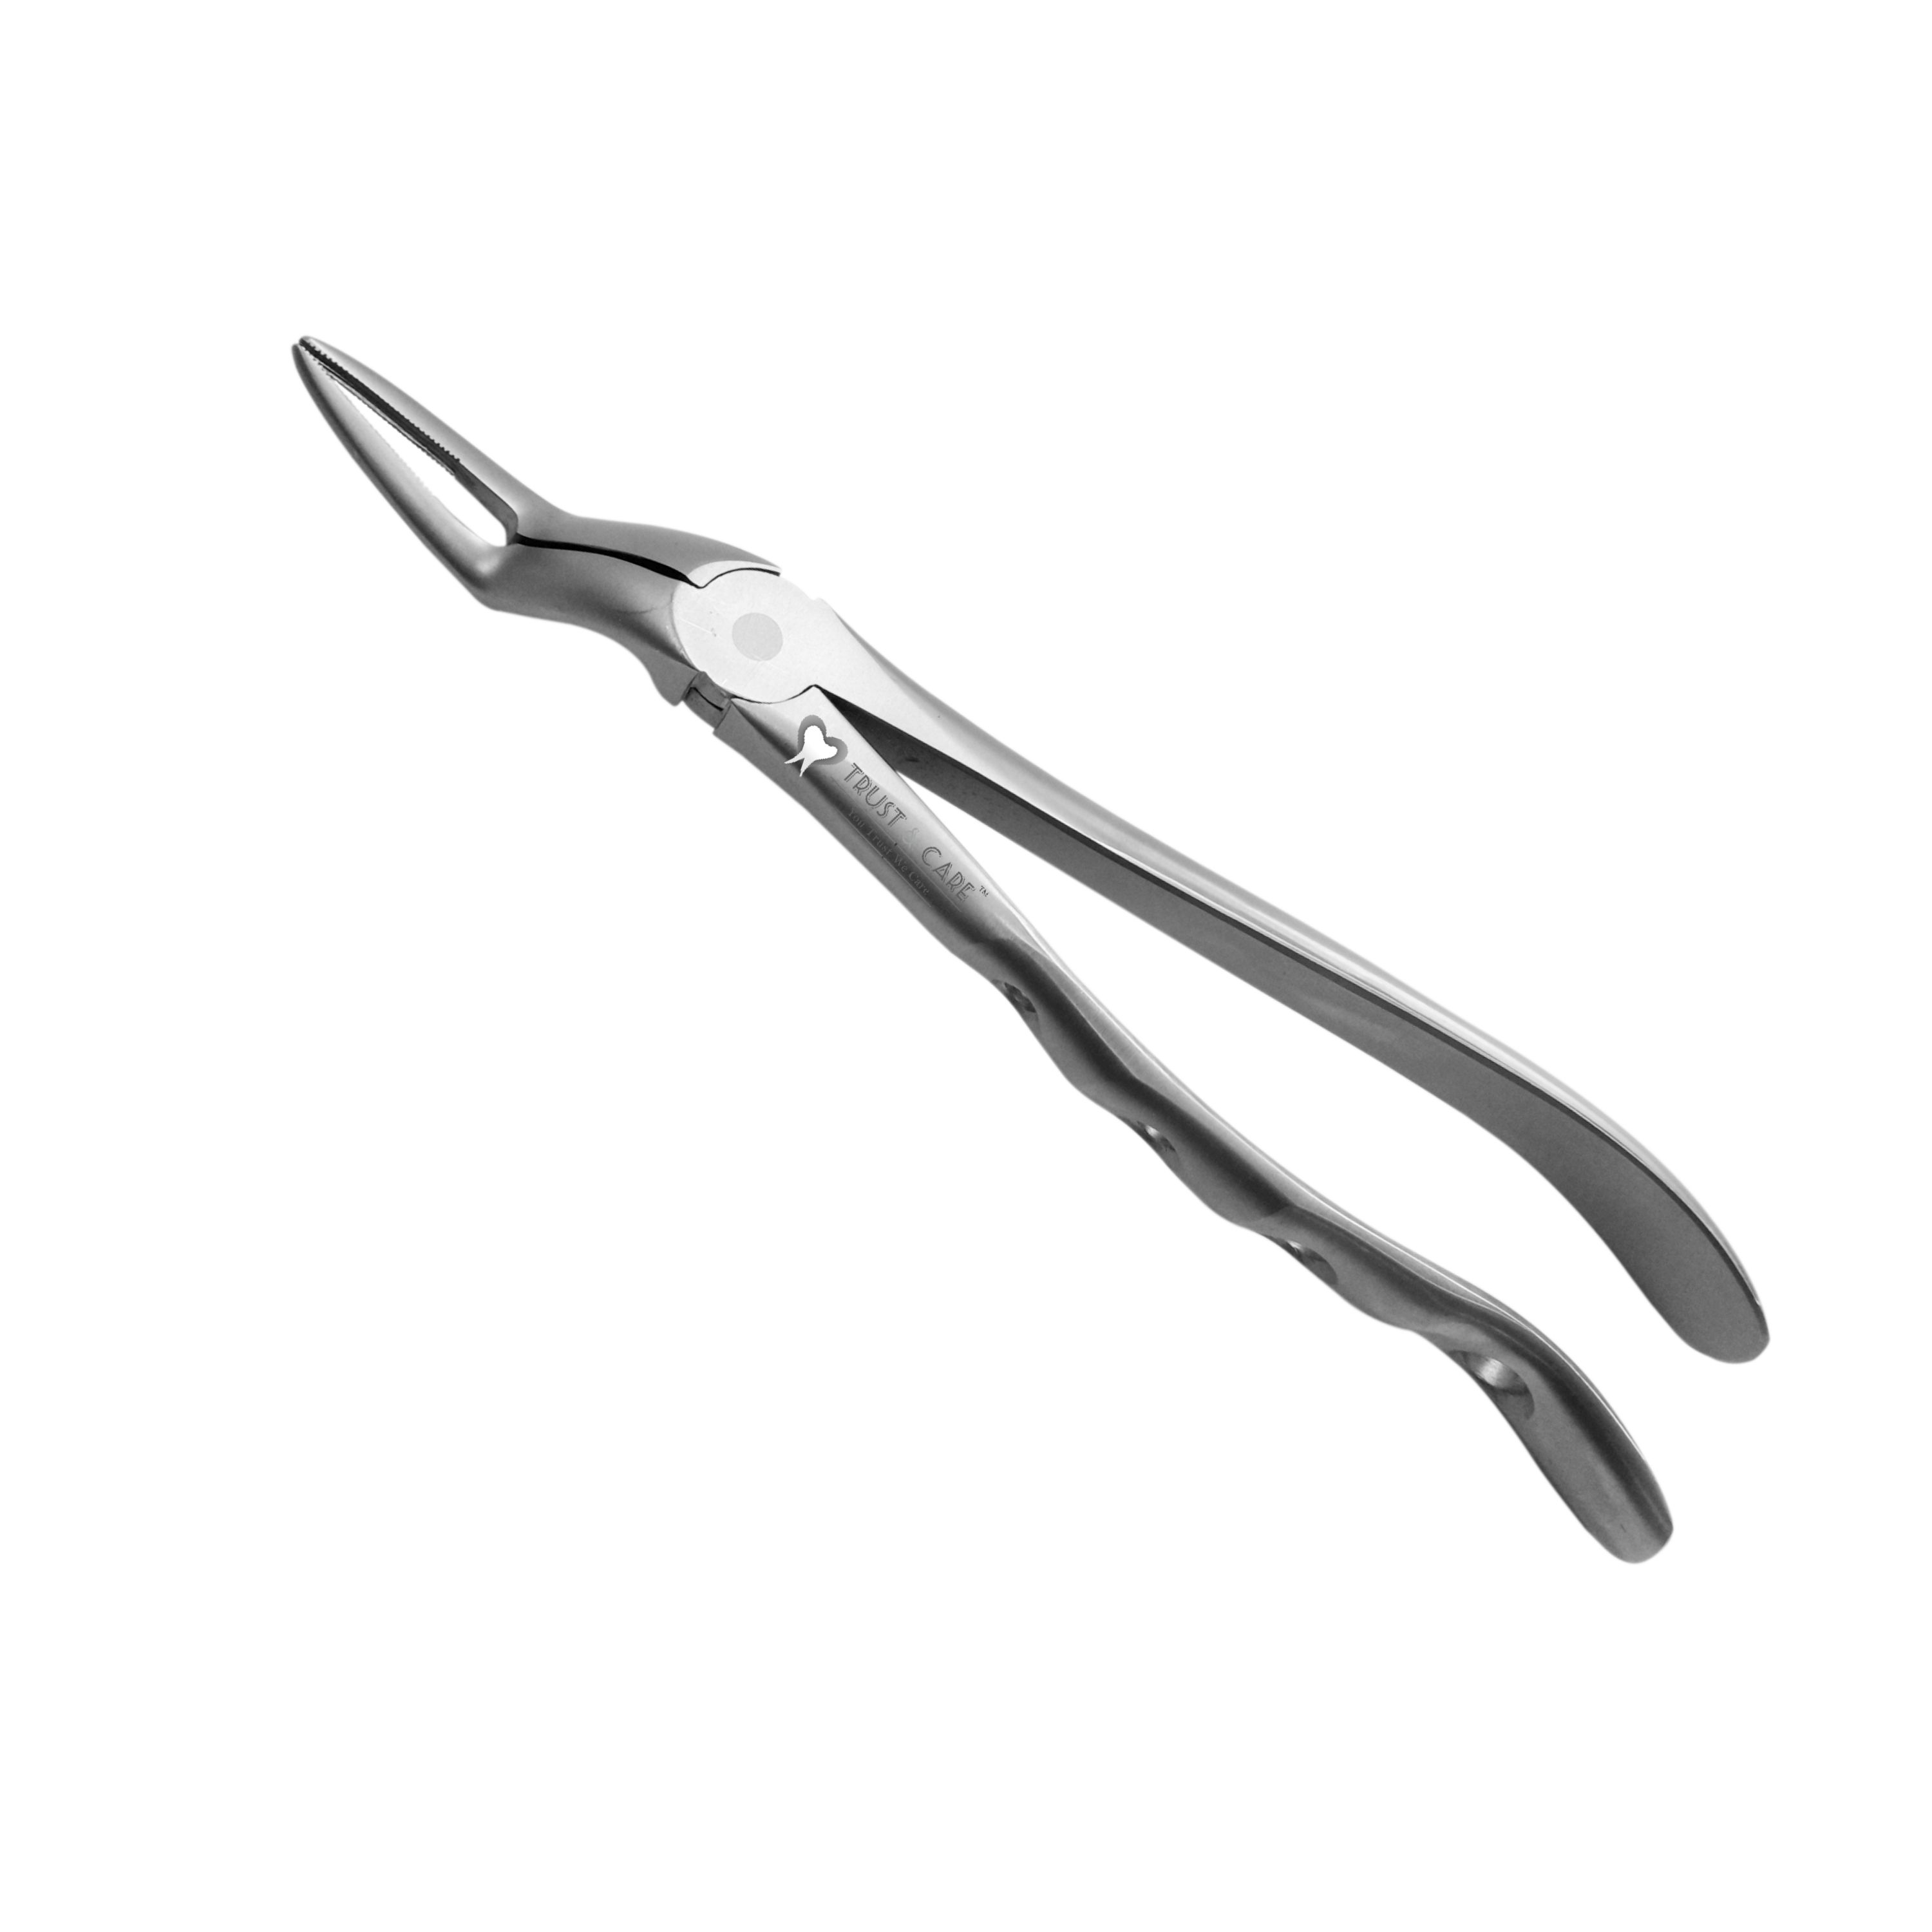 Trust & Care Secure Forcep Upper Roots Fig No. 897.00